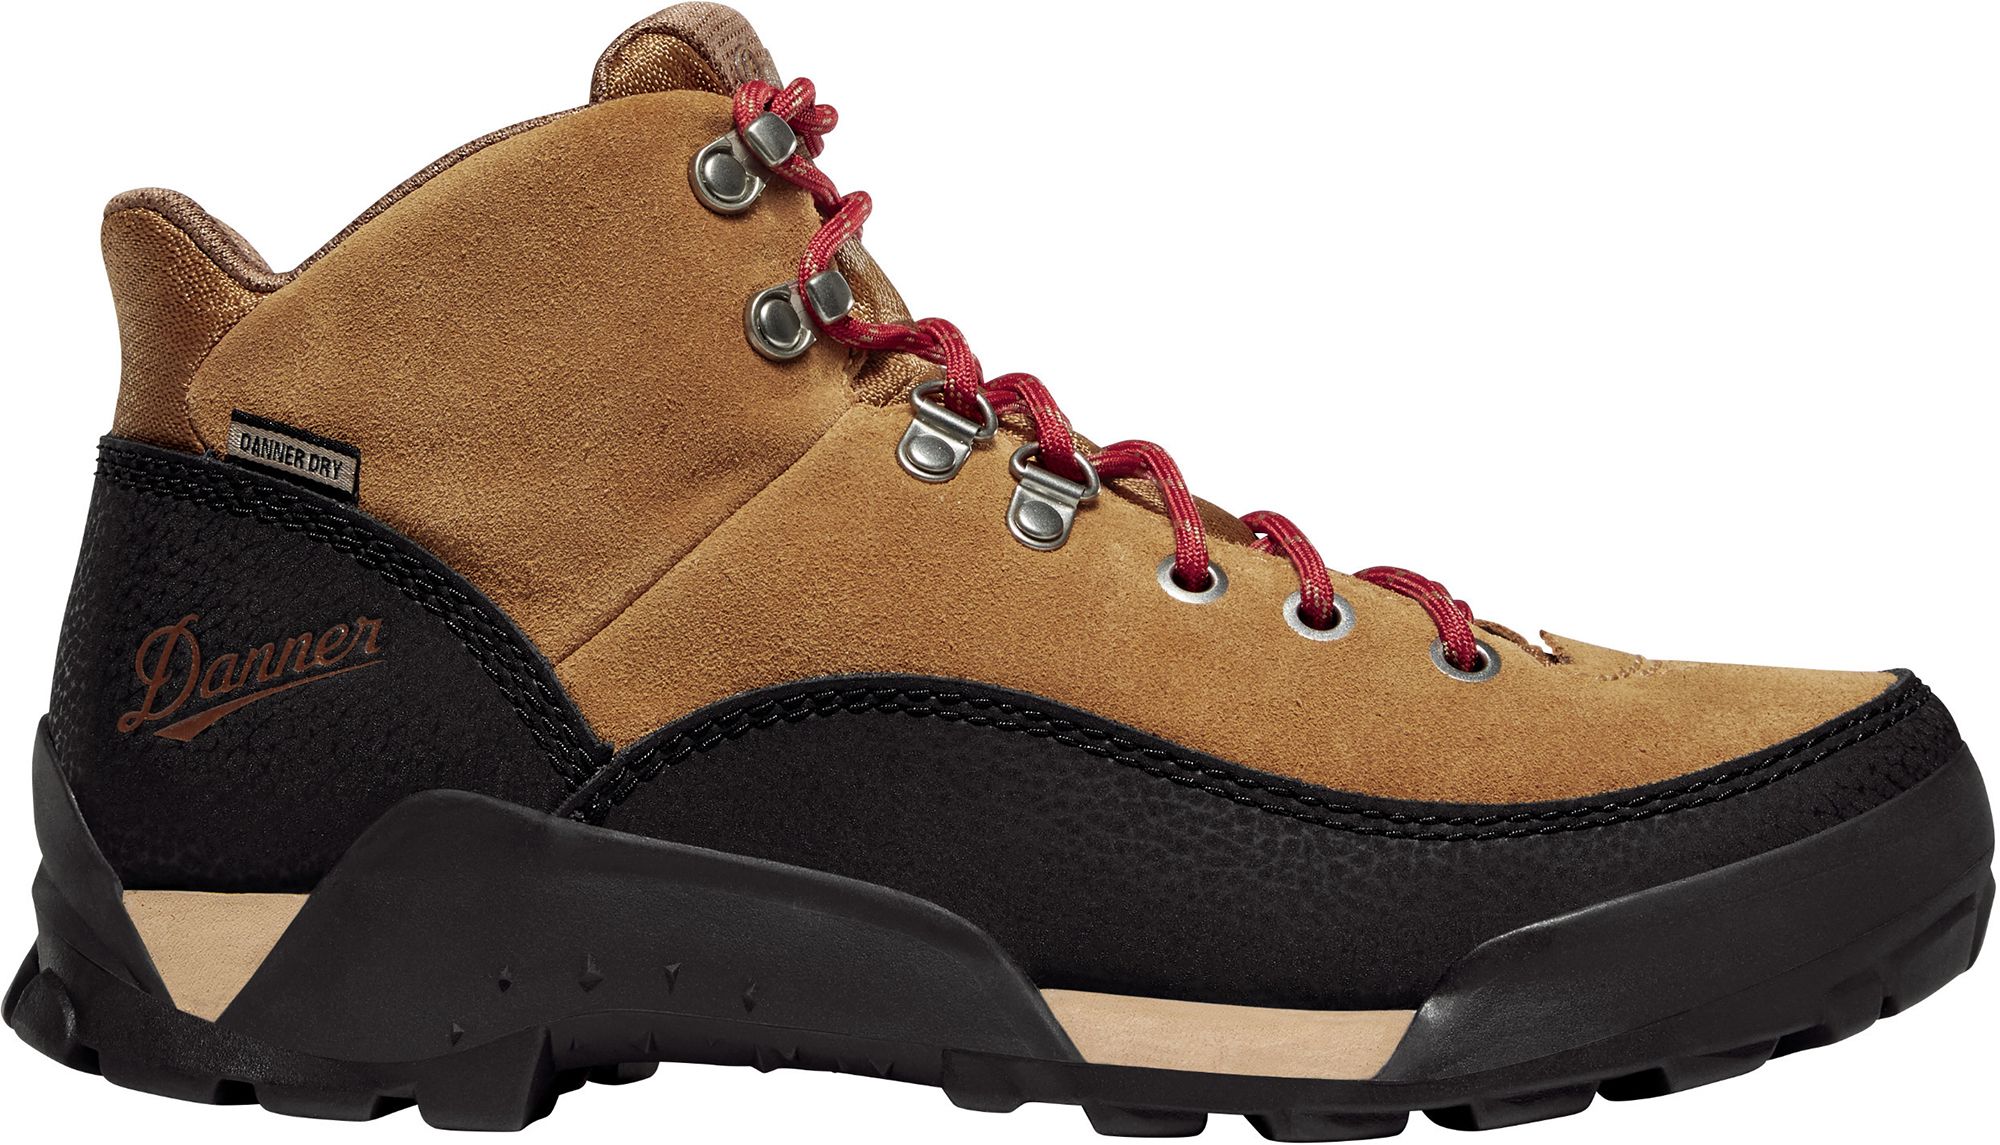 Photos - Trekking Shoes Danner Women's Panorama 6" Waterproof Hiking Boots, Size 6.5, Brown/Red 22 